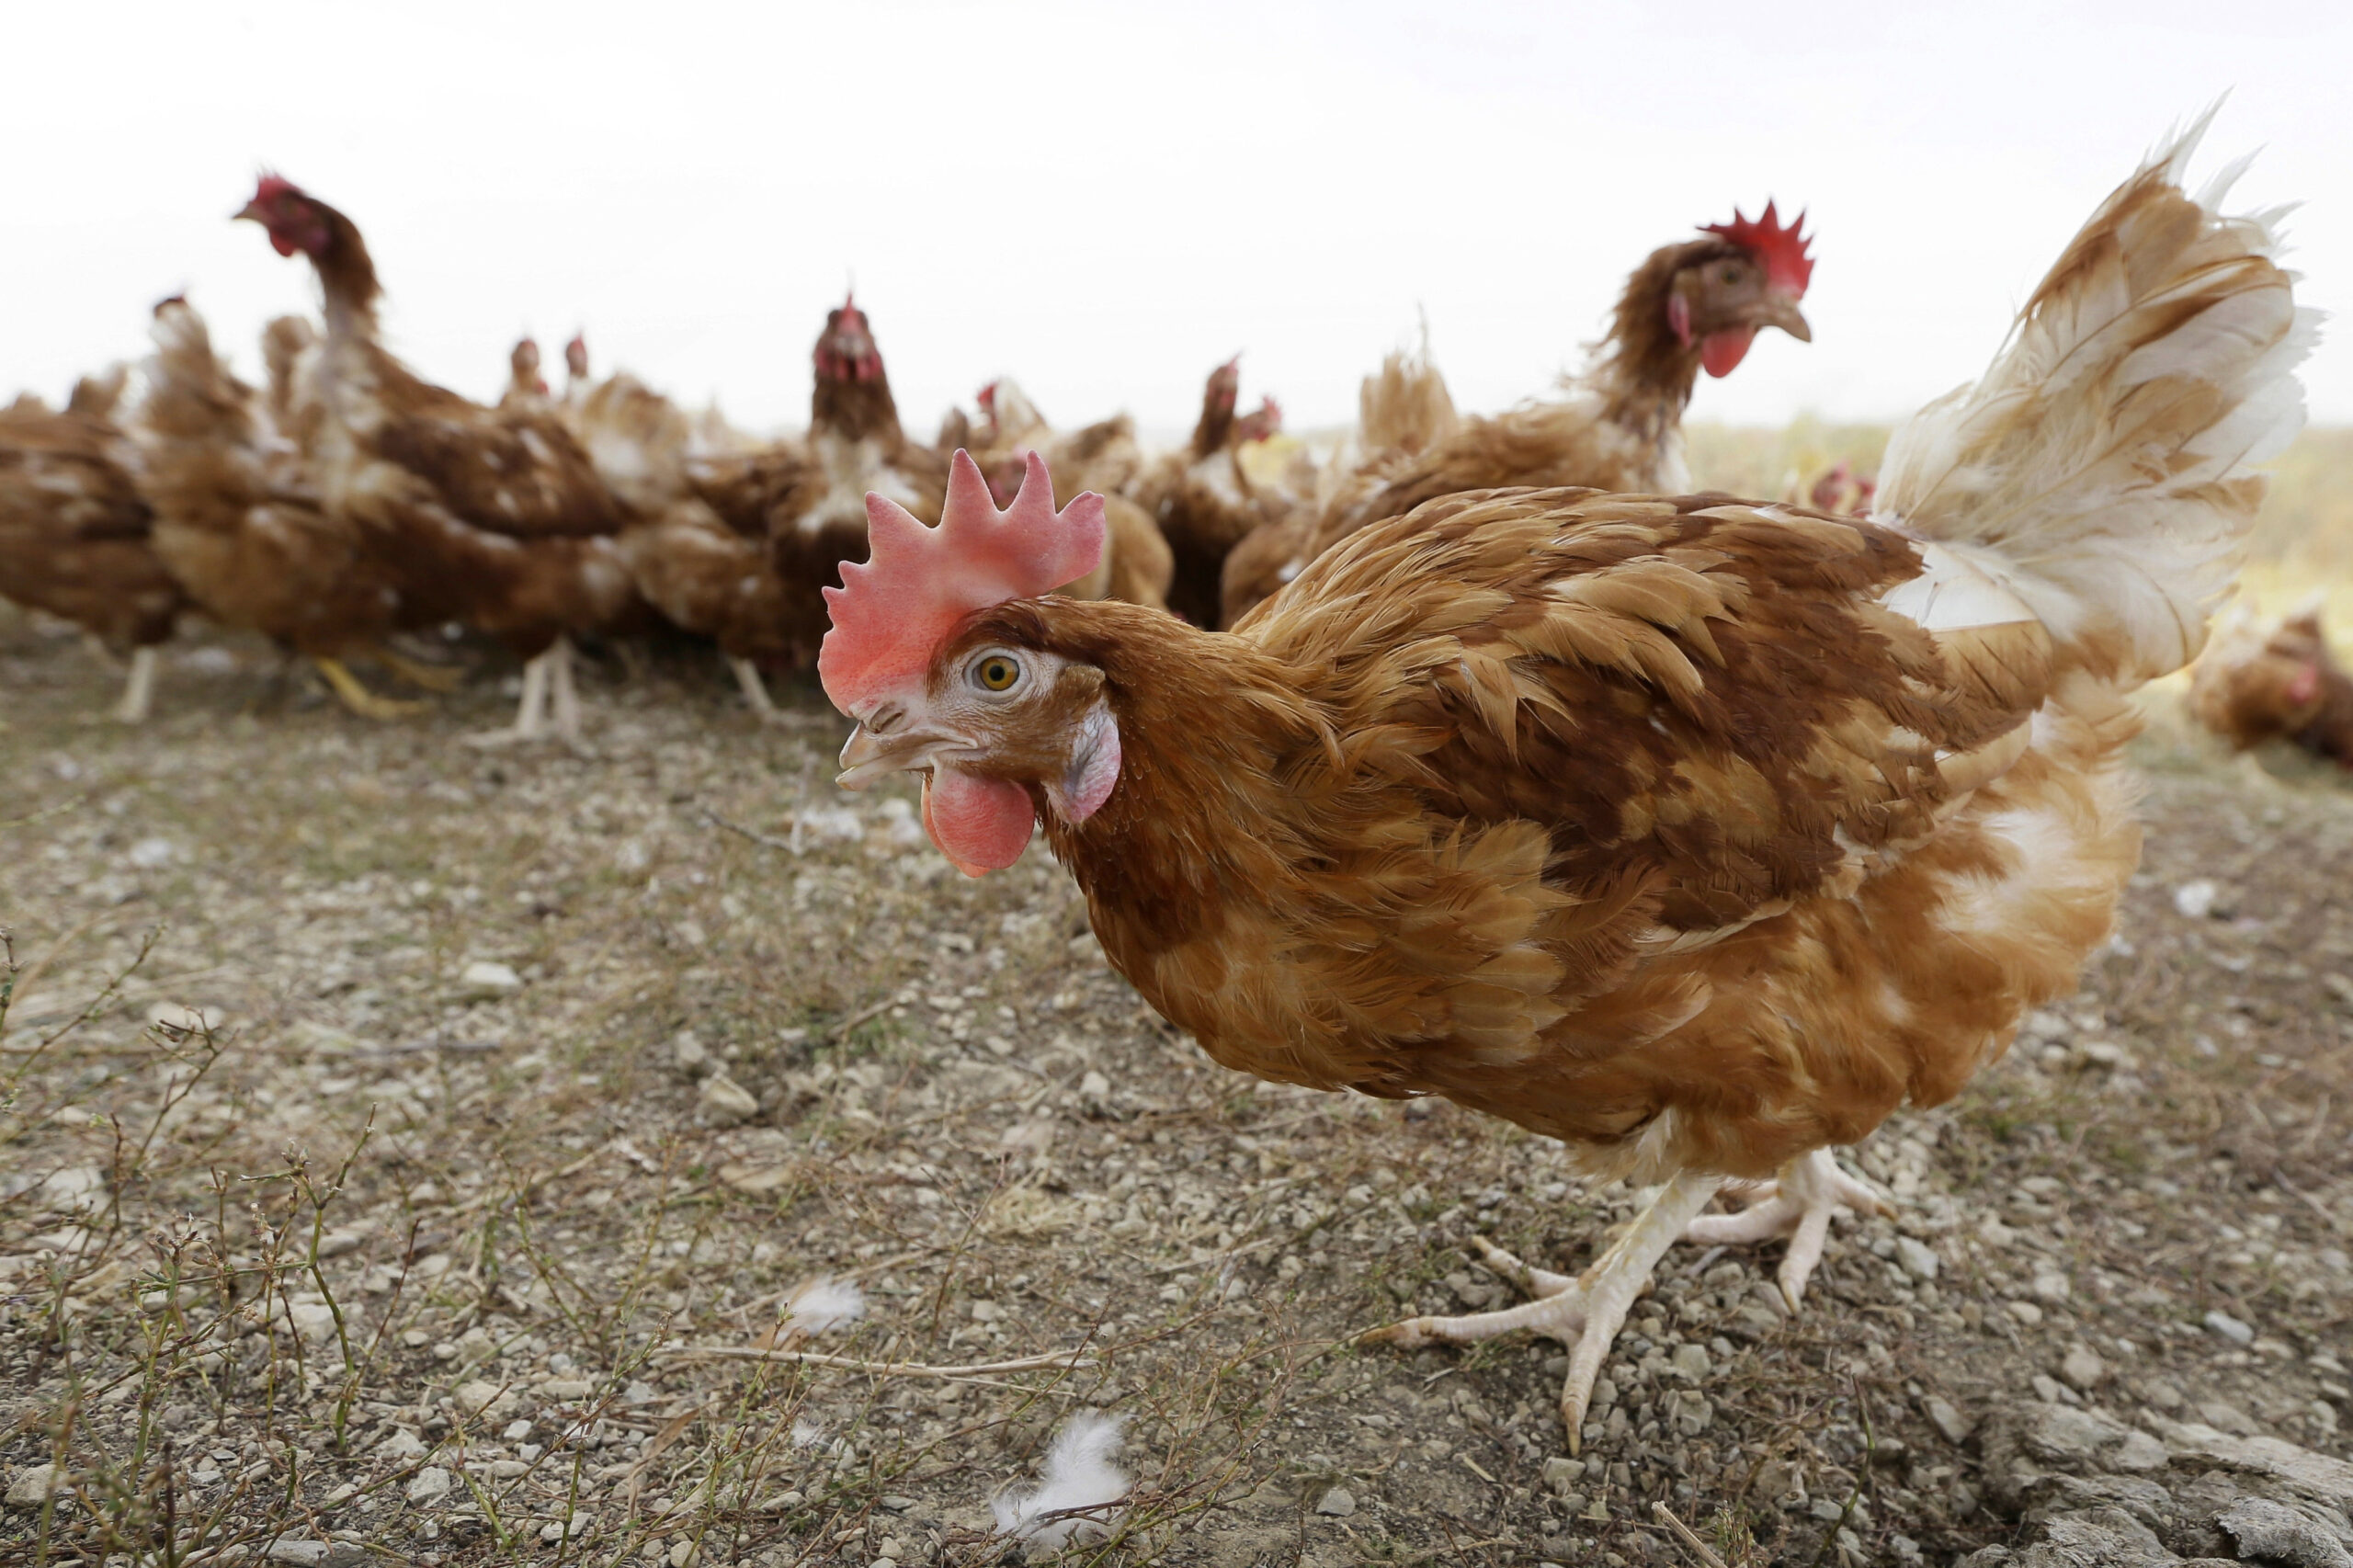 Chickens could be kept in every Wisconsin community under new bill